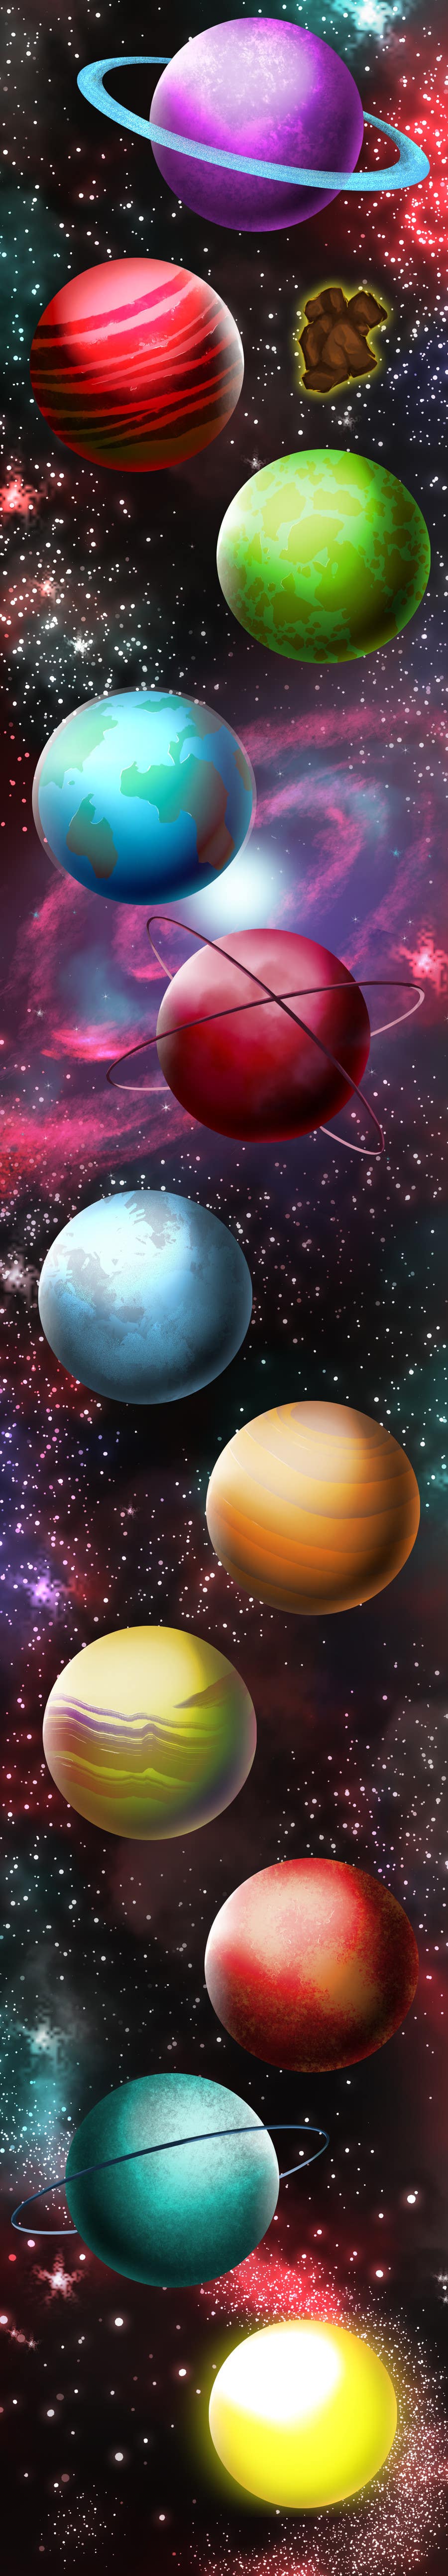 Penyertaan Peraduan #19 untuk                                                 Looking for an artist to design a deep space game background and some planets.
                                            